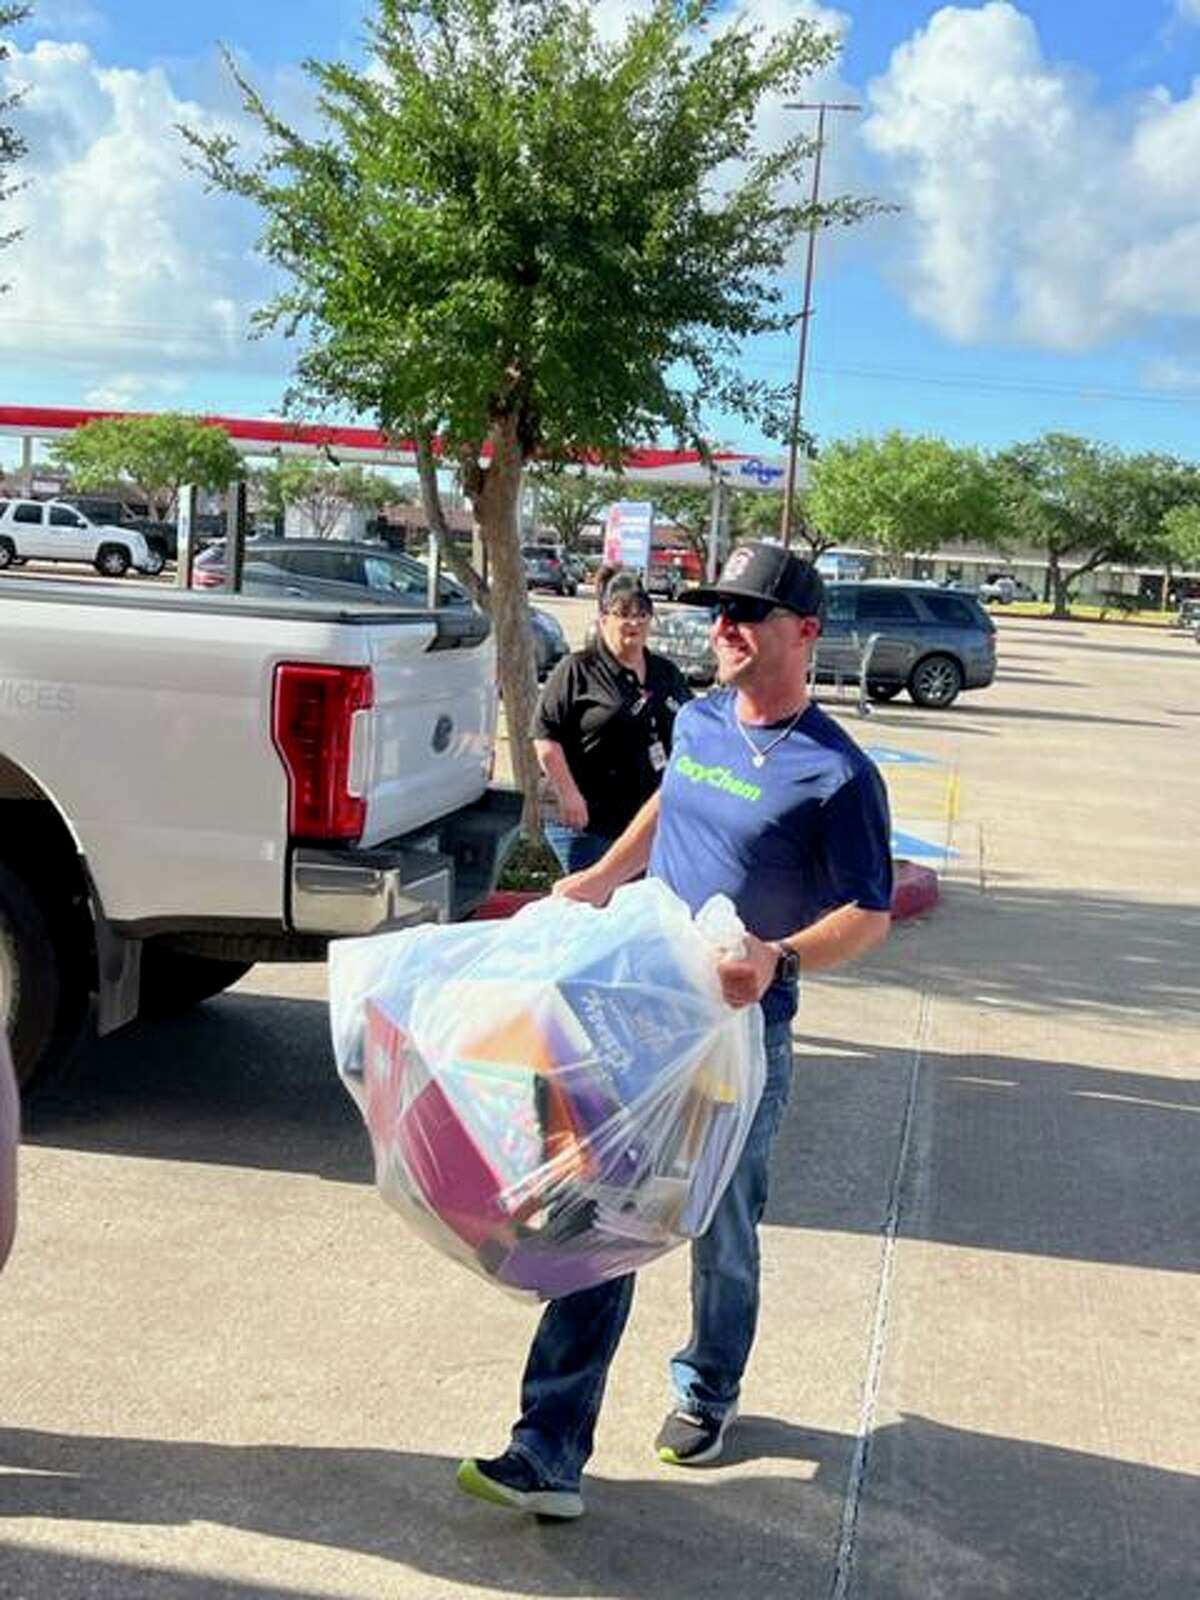 In La Porte, the city’s first Fill the Bus on July 29 collected more than 400 backpacks and money to provide 100 haircut certificates to give out to students.